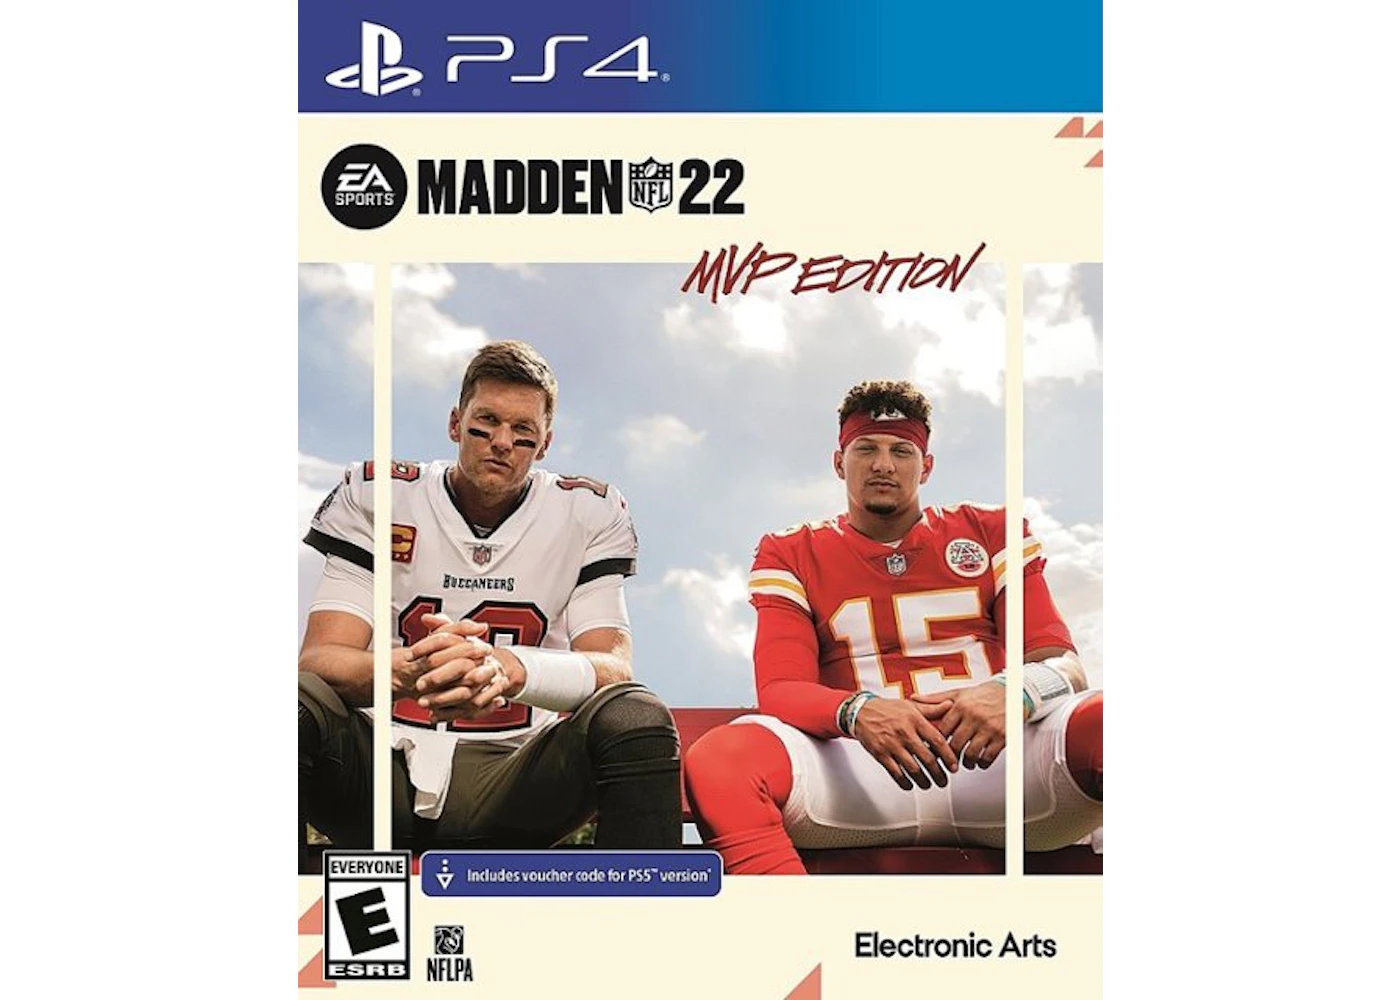 madden 2005 collector's edition